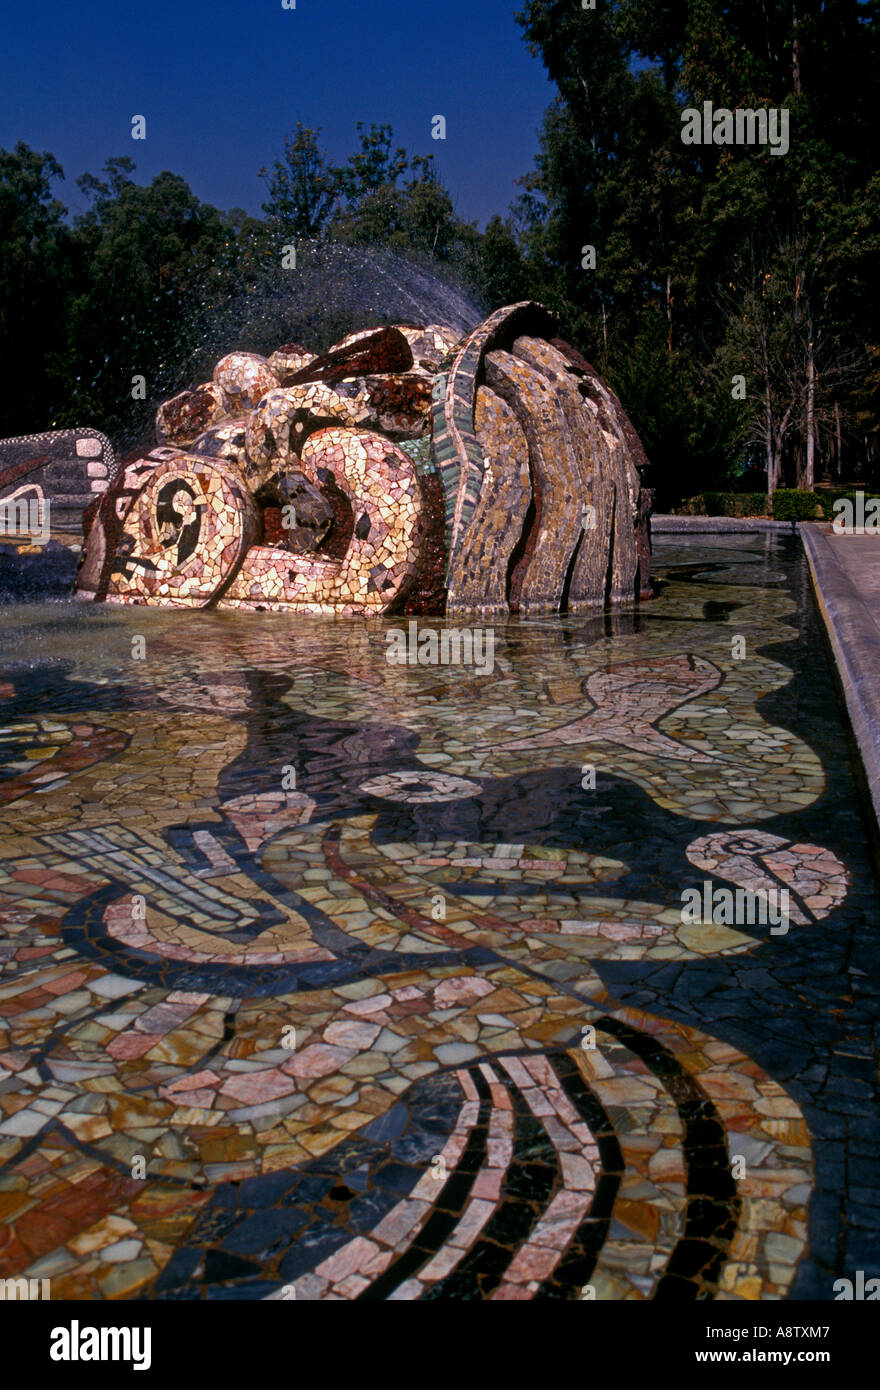 Tlaloc, rain god, sculpture, water fountain, mosaic tiles, by Diego Rivera, Diego  Rivera, Chapultepec Park, Mexico City, Federal District, Mexico Stock Photo  - Alamy